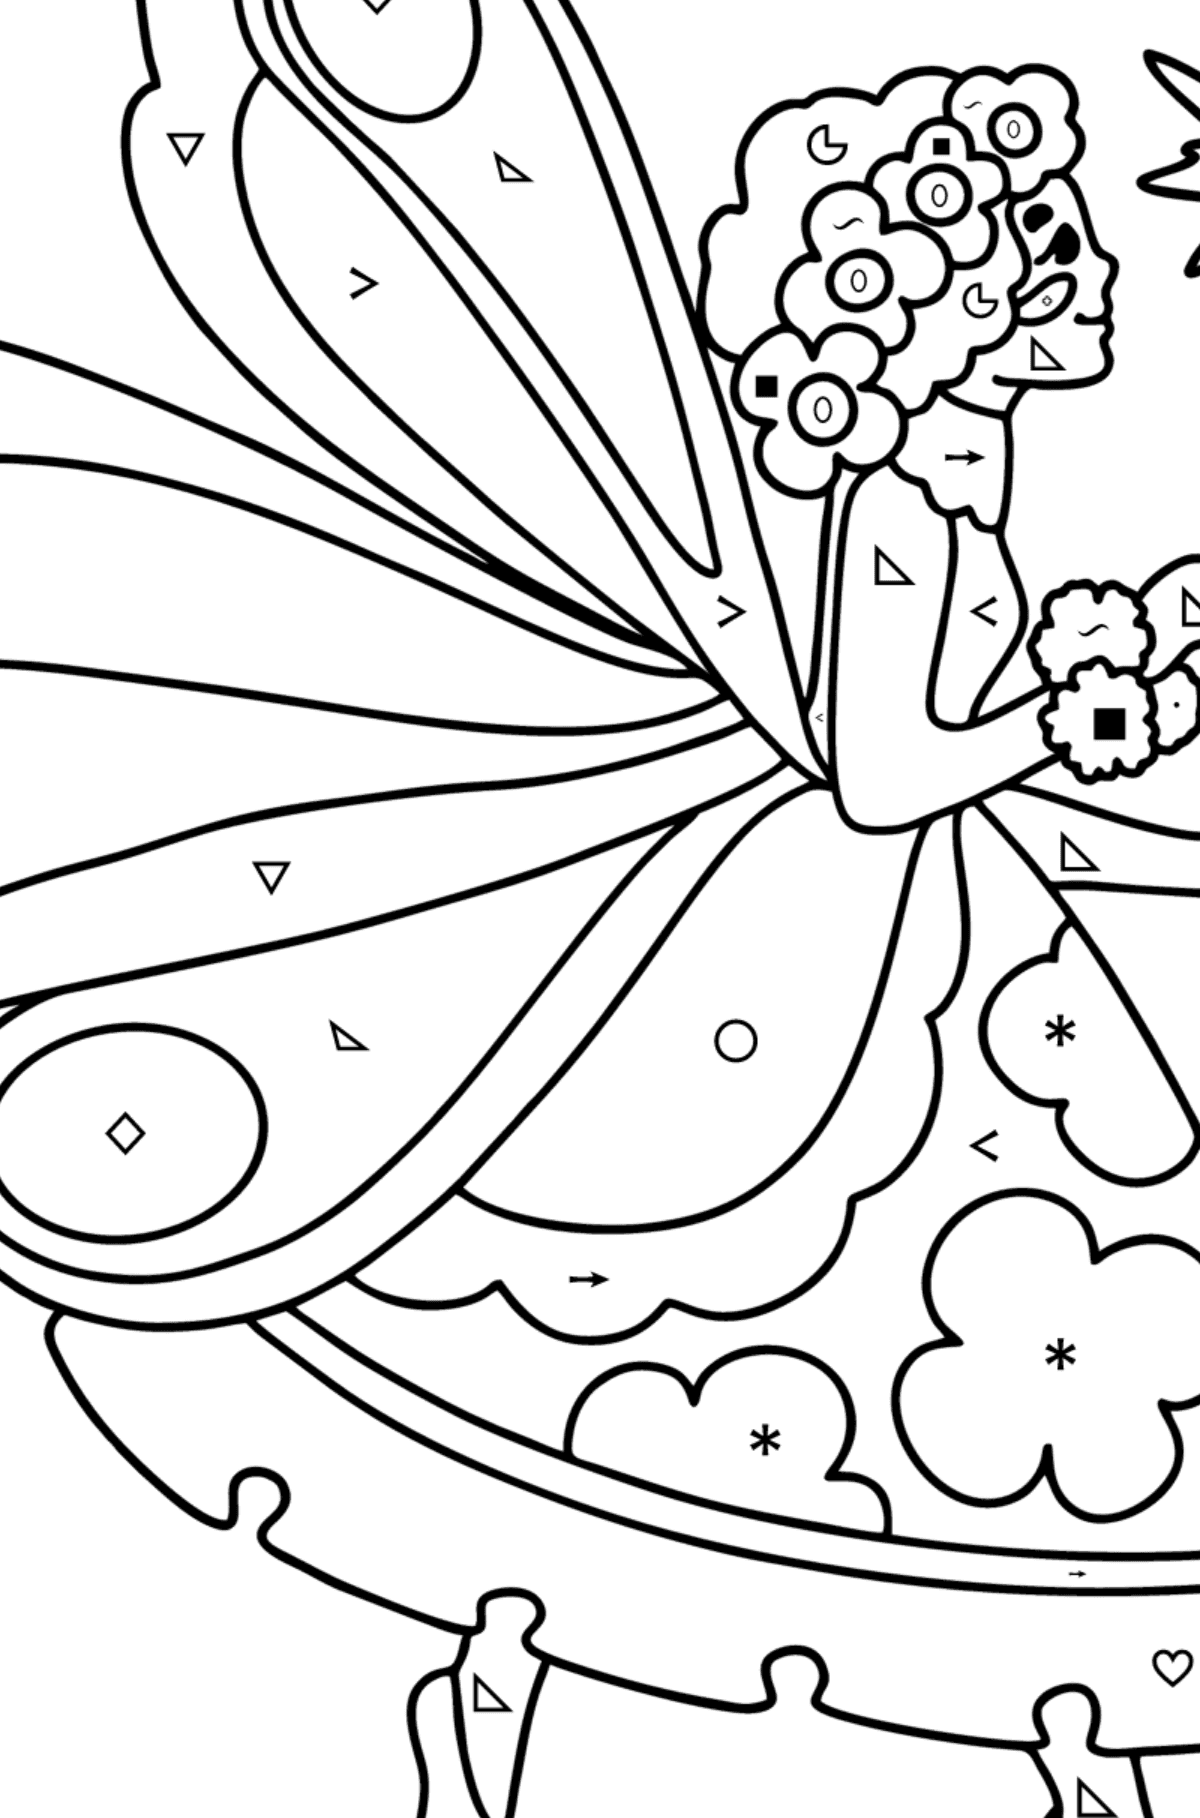 Kind fairy coloring page - Coloring by Symbols and Geometric Shapes for Kids